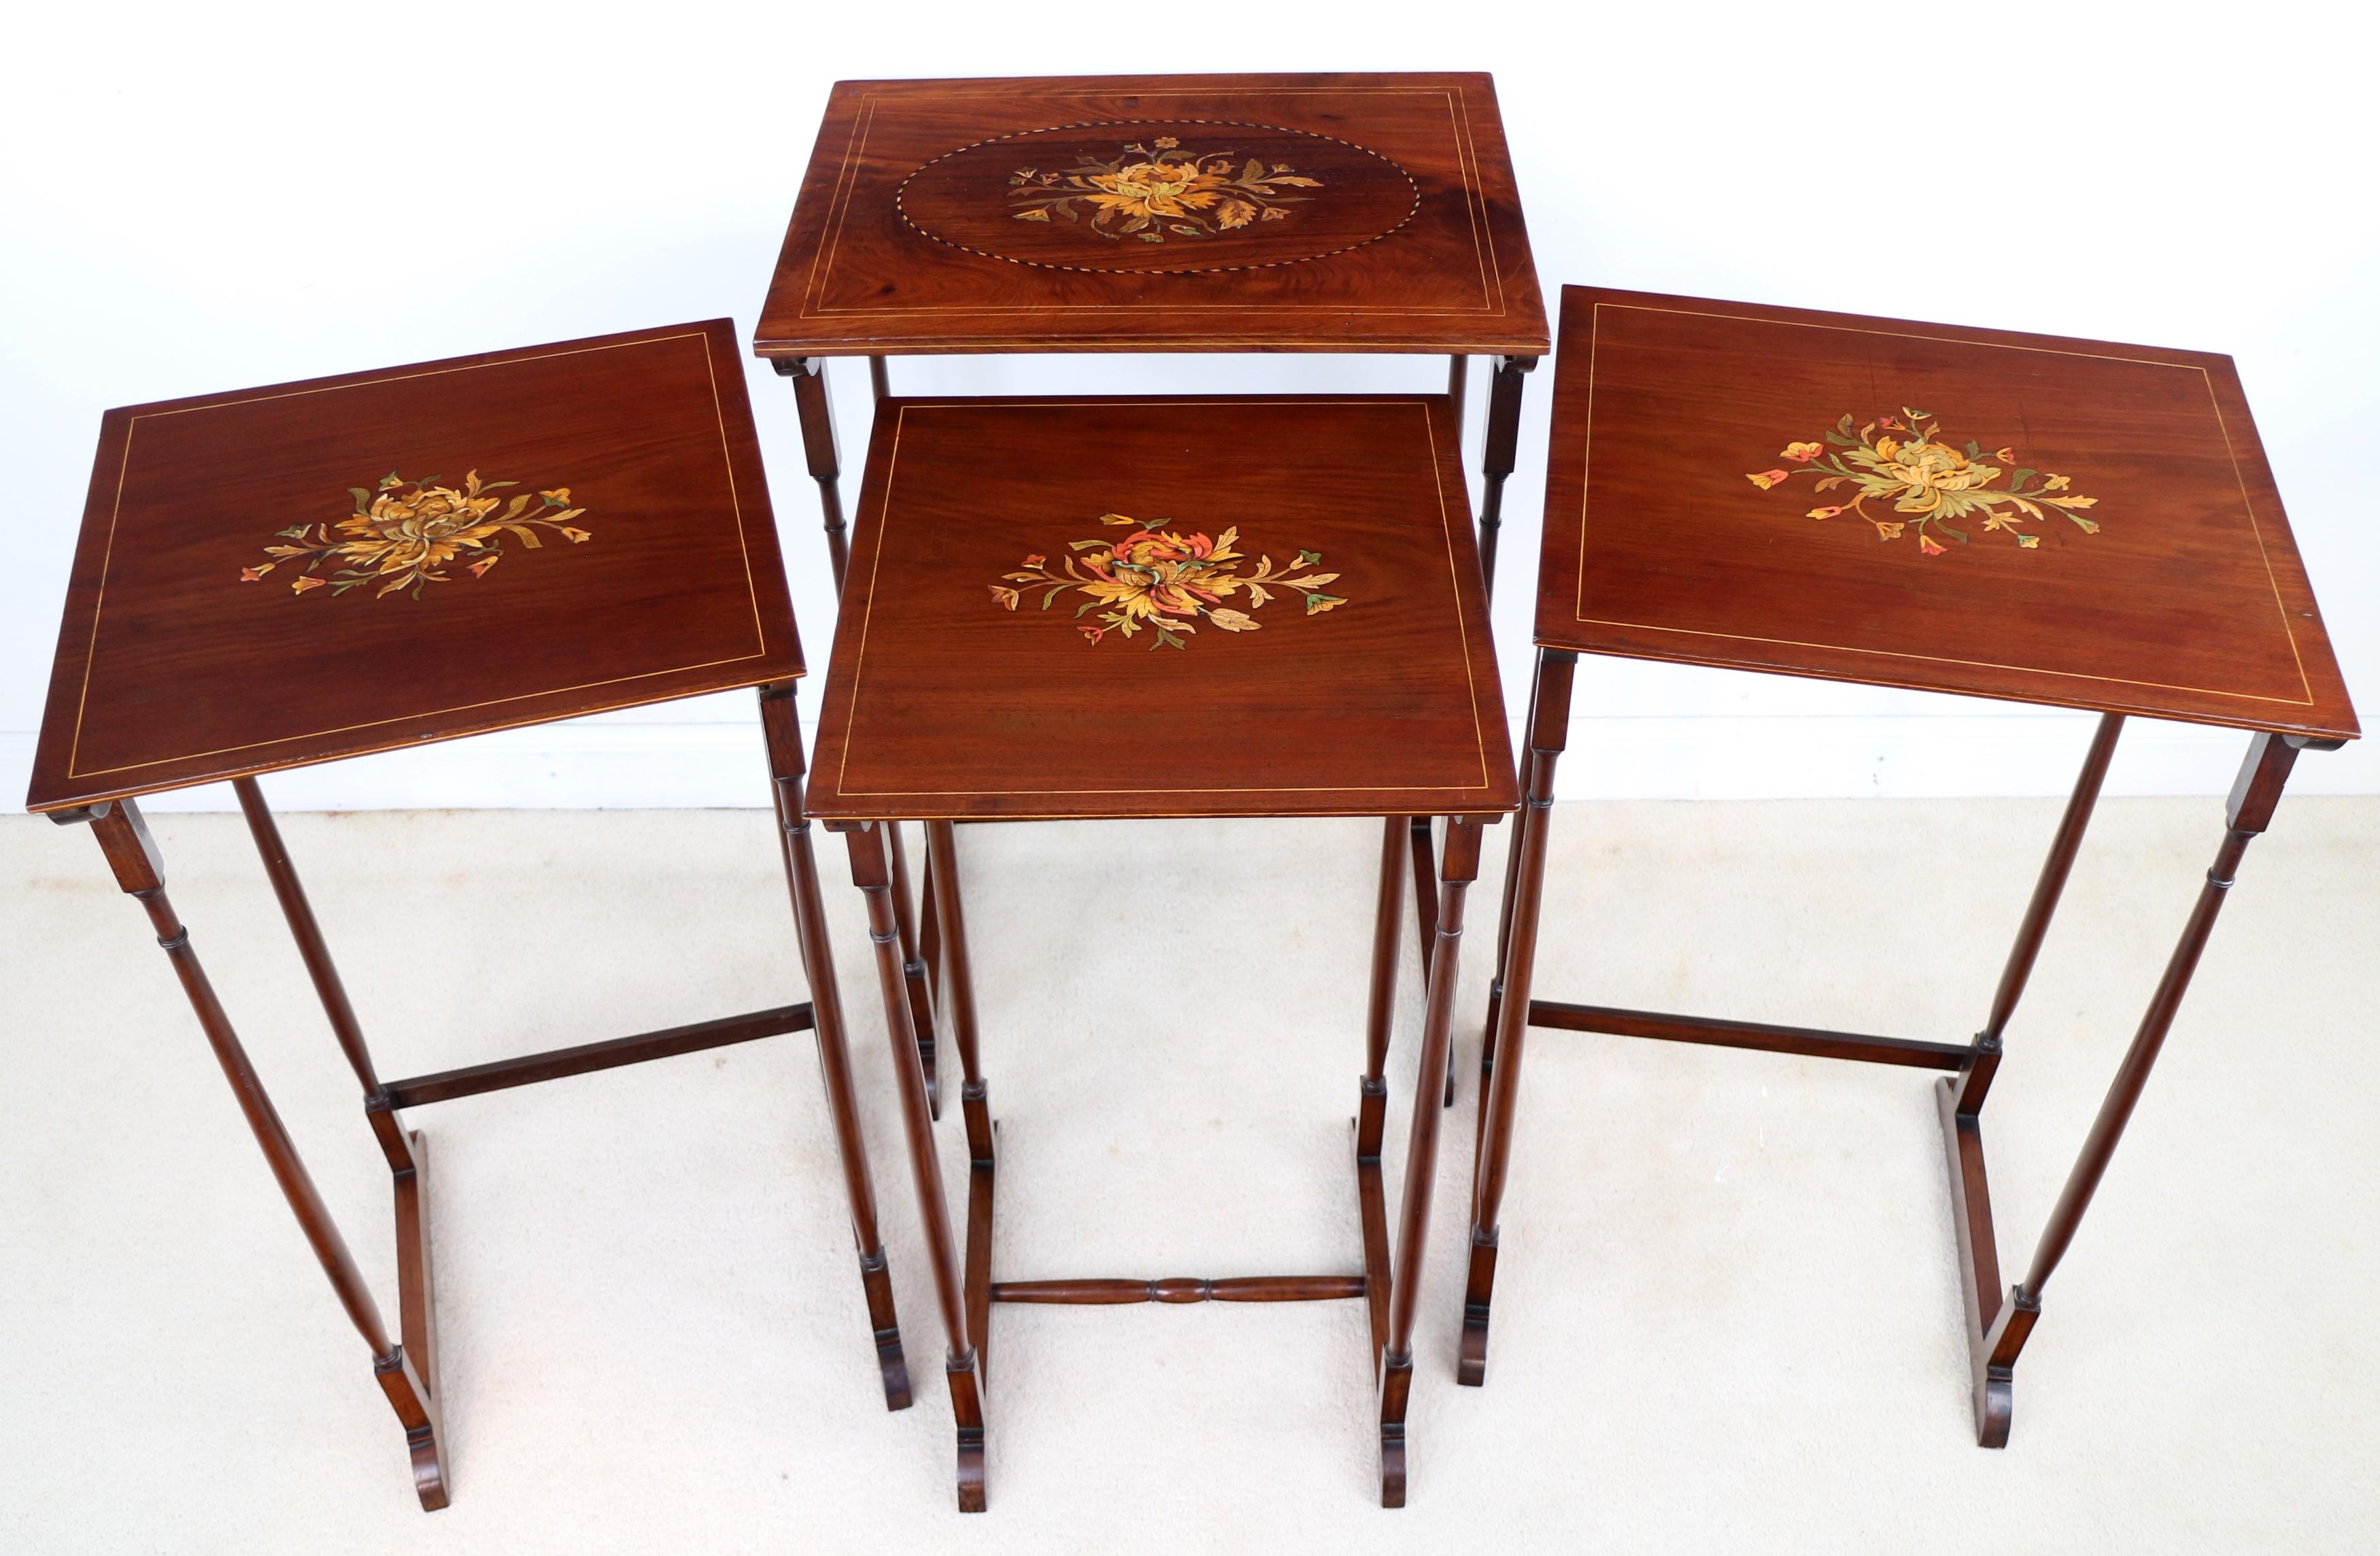 Set of Antique English Victorian Mahogany and Marquetry Inlaid Quartetto Tables For Sale 4